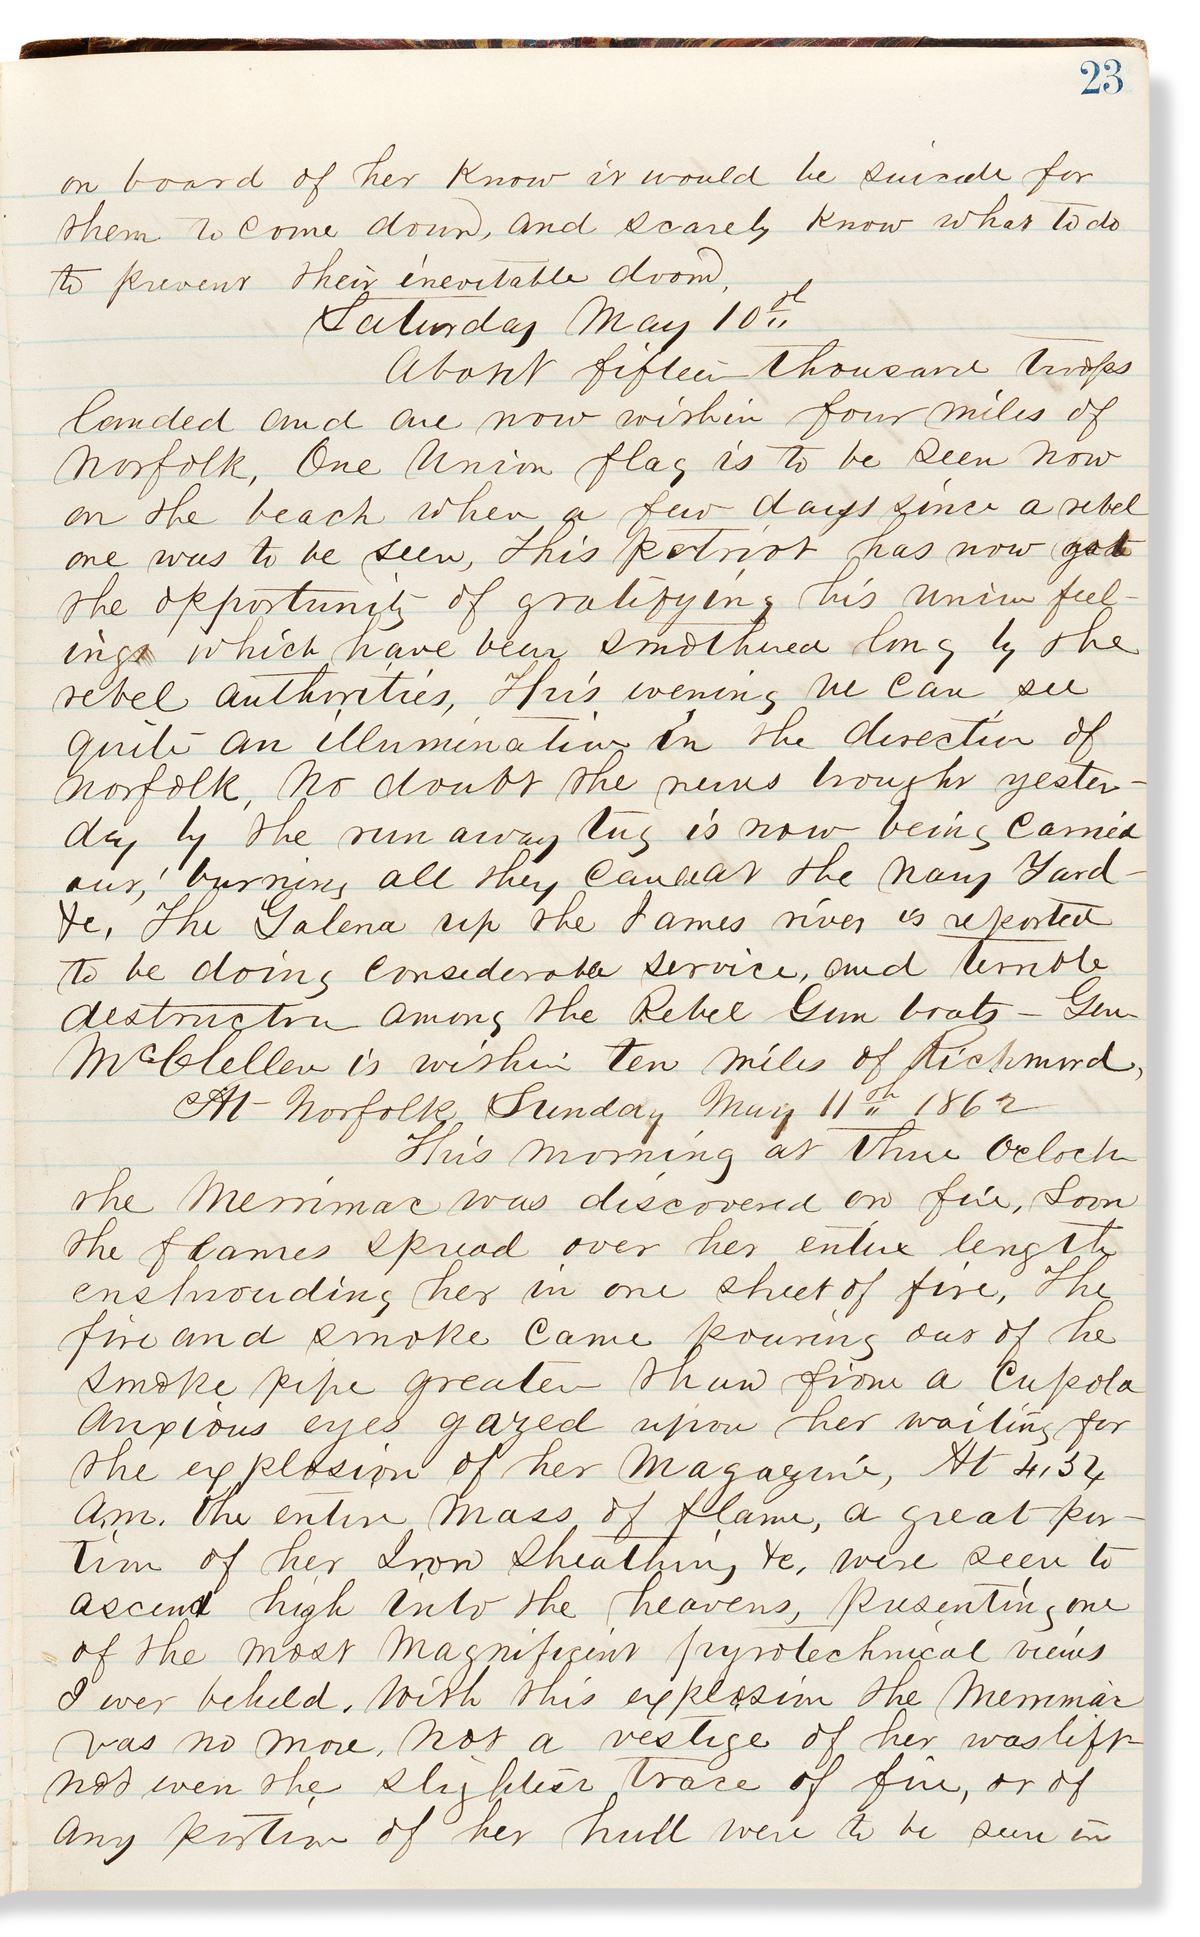 (CIVIL WAR--NAVY.) [Philip G. Peltz.] Diary of a naval officer in pursuit of the Merrimac.